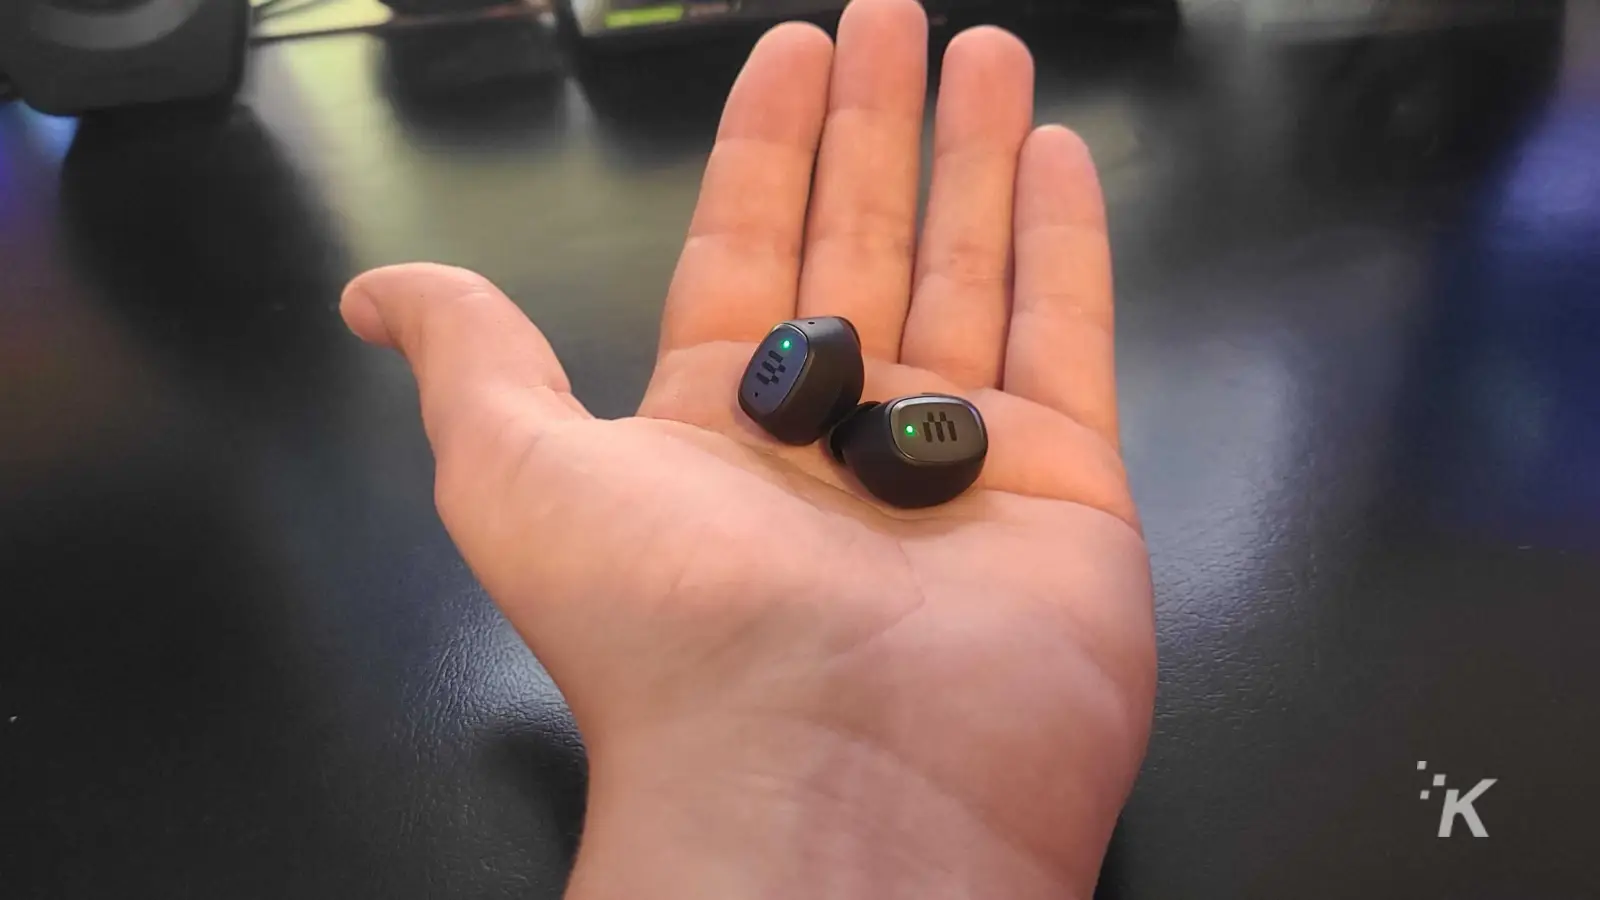 epos gtw 270 earbuds in hand